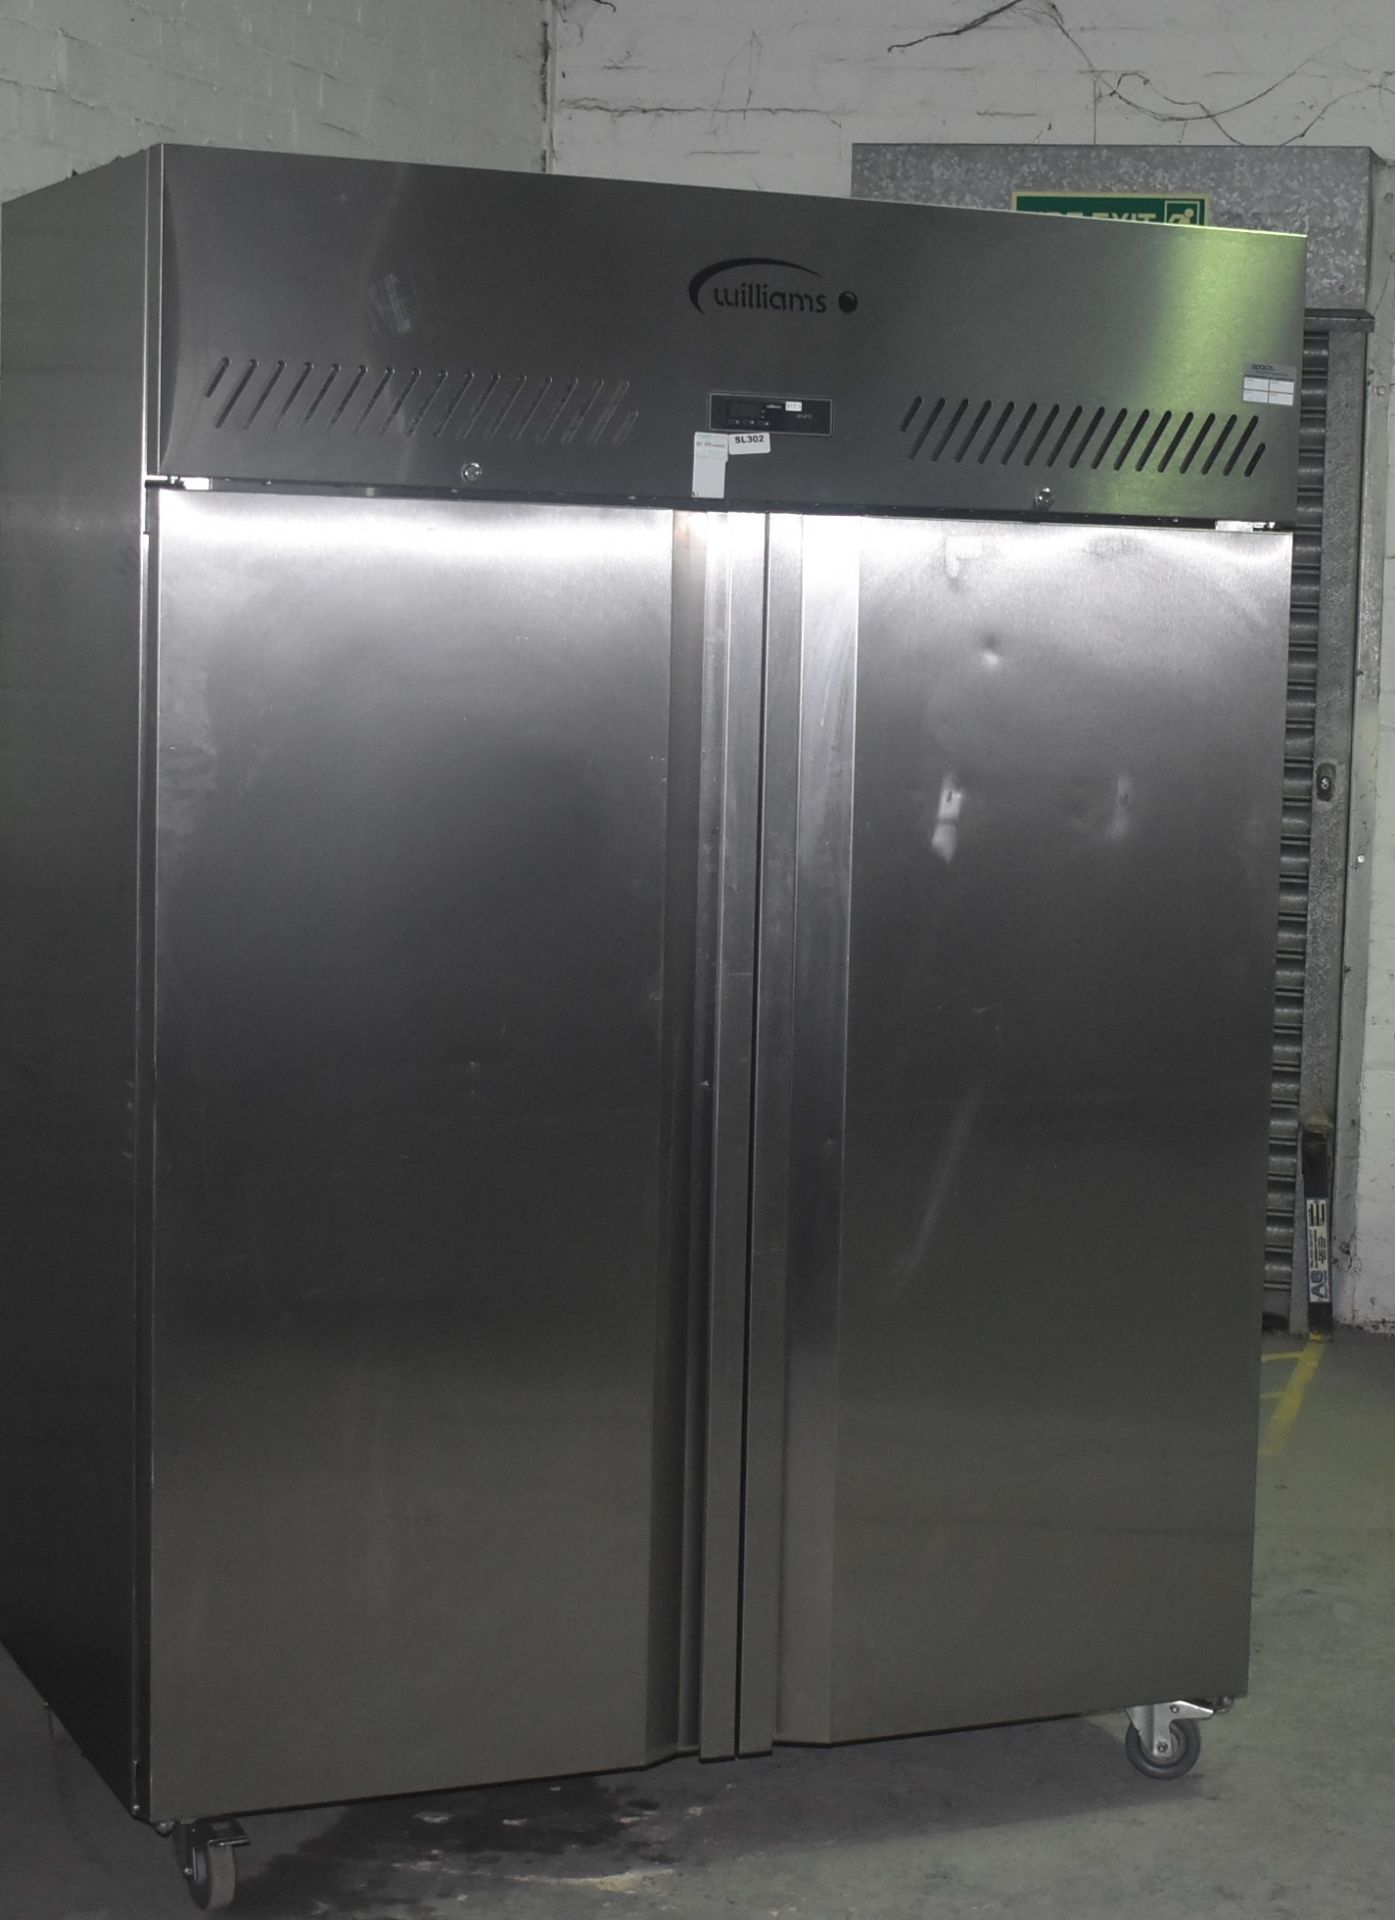 1 x Williams Double Door Upright Refrigerator - Model MJ2SA - Recently Removed From Major - Image 4 of 7